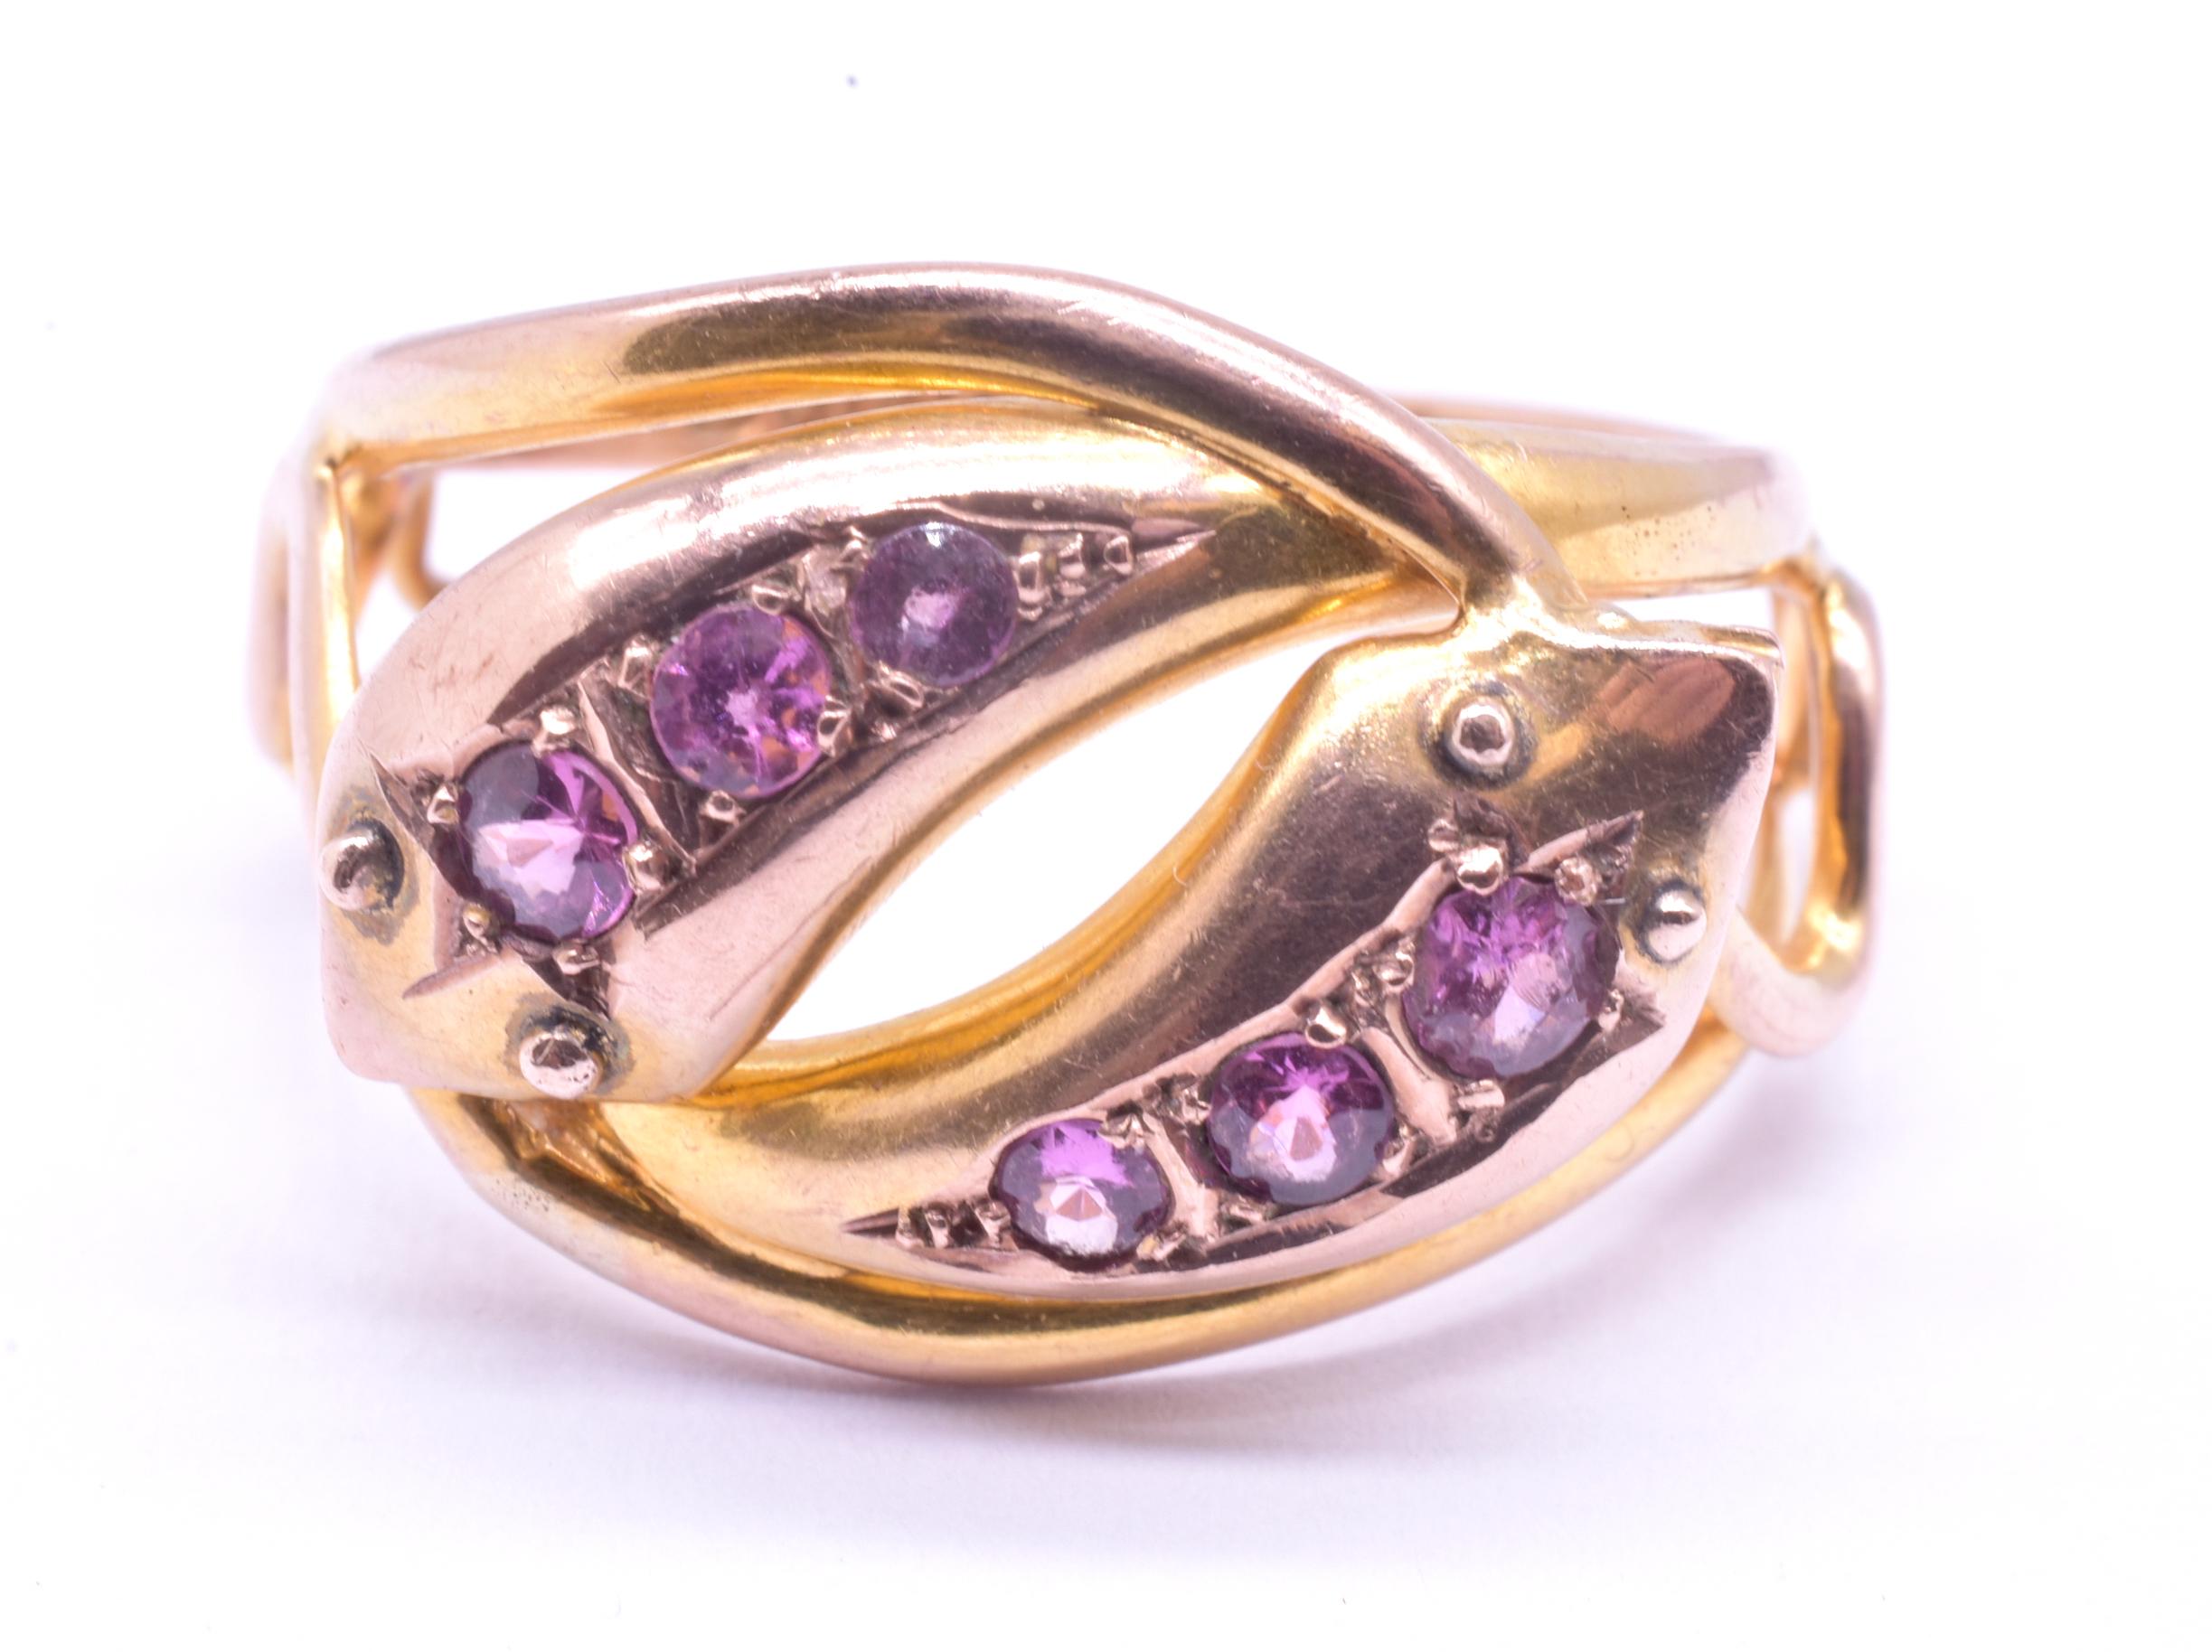 Hallmarked 1911 Chester 9K Double Snake Ring with 6 Pink Sapphire Gemstones 4